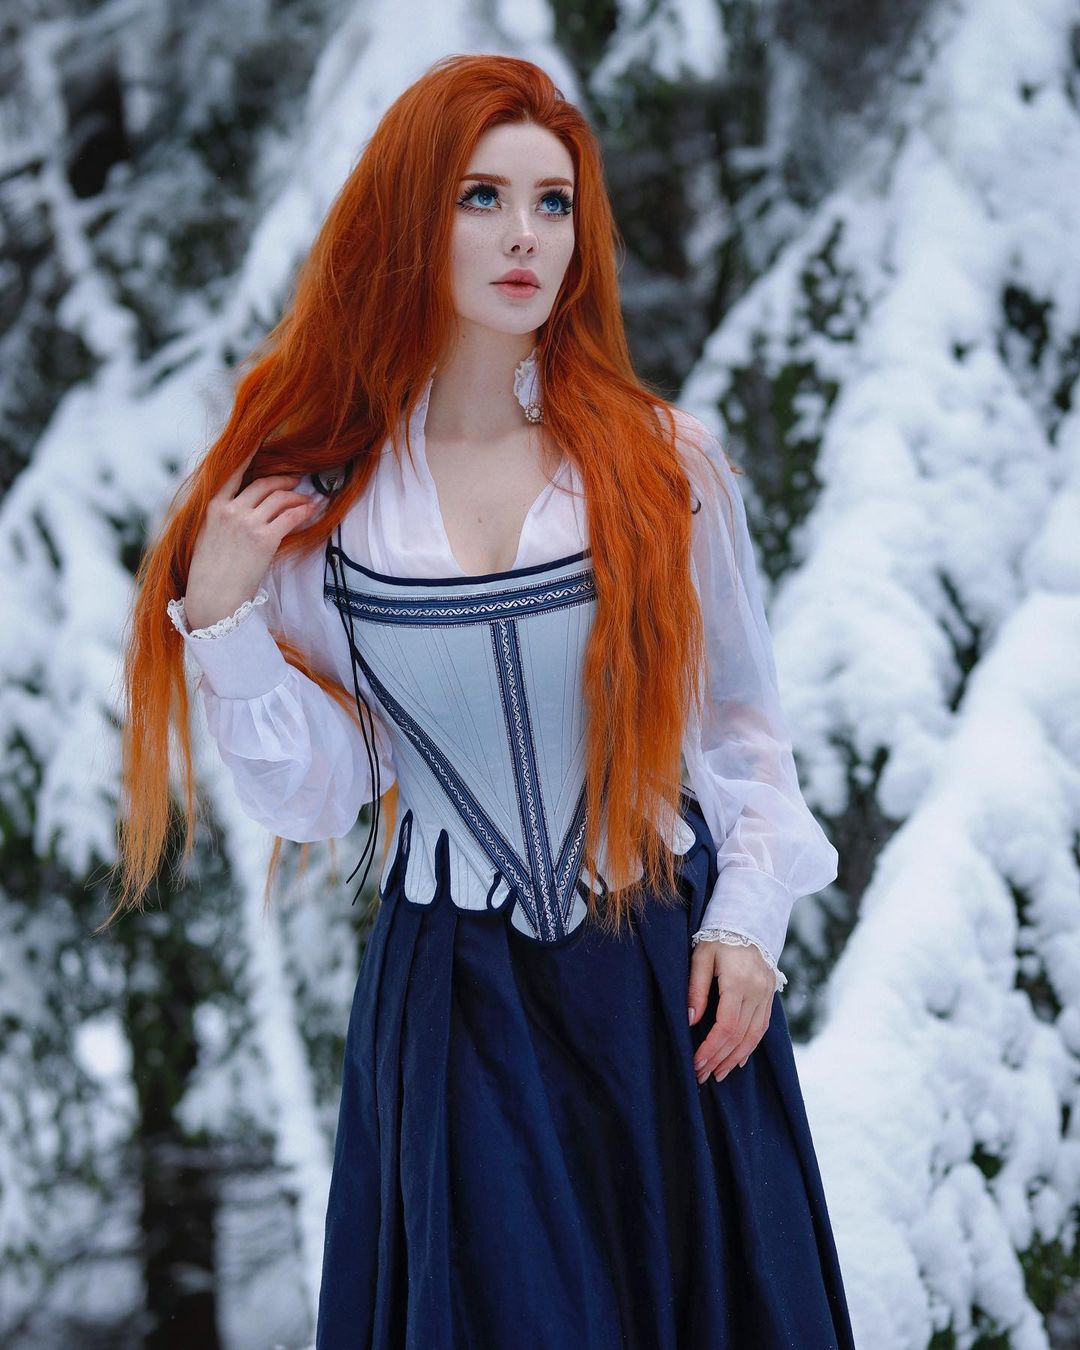 White Shirt With Blue Ridged COrset And Blue Skirt